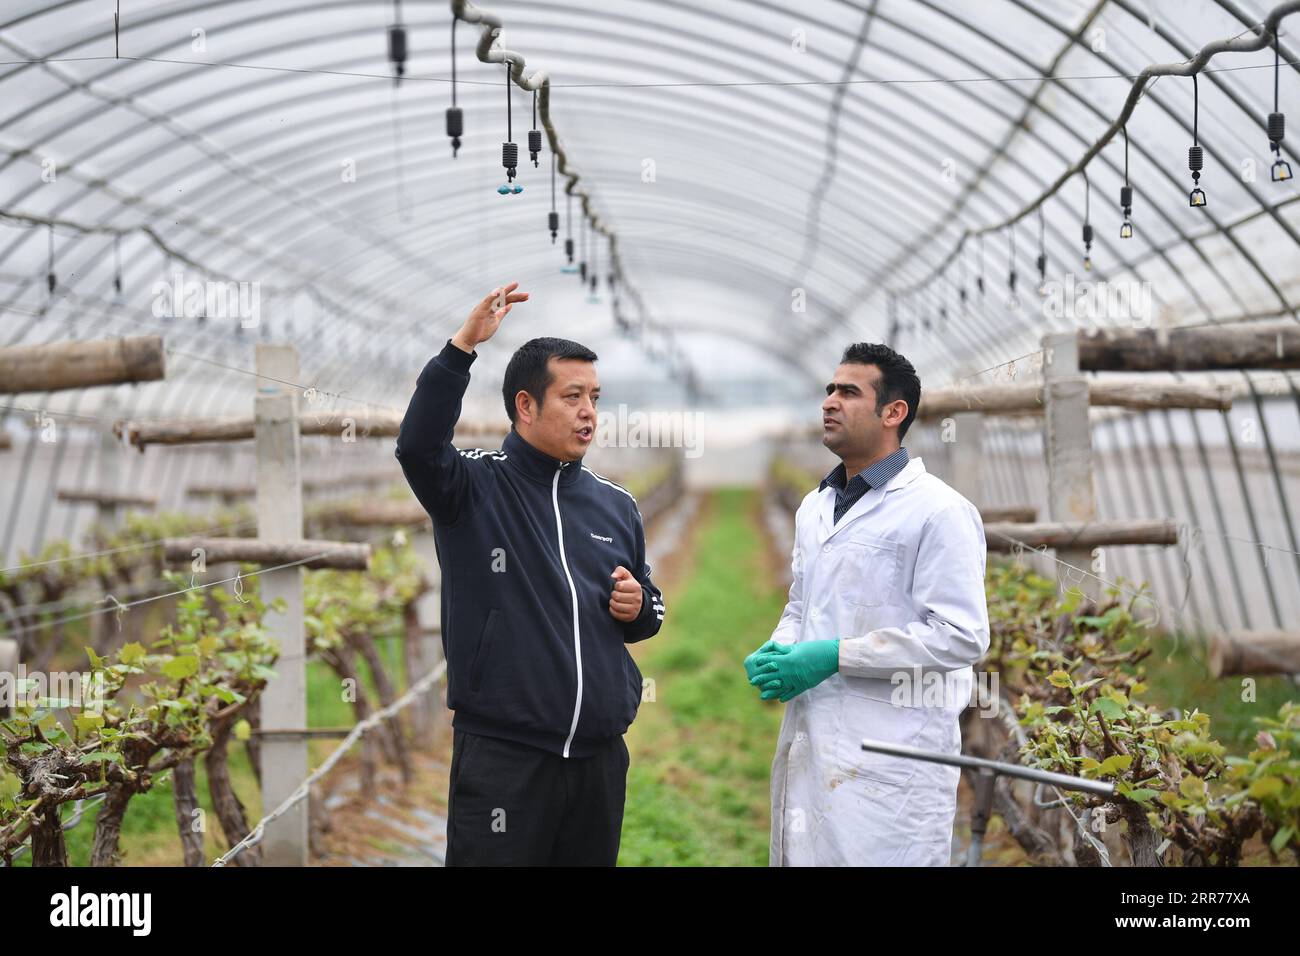 210318 -- XI AN, March 18, 2021 -- Abdul Ghaffar Shar R talks with staff member Li Haiping about irrigation equipment at a cooperative of Yangling agricultural hi-tech industrial demonstration zone in northwest China s Shaanxi Province, March 17, 2021. Abdul Ghaffar Shar, 30, is a Pakistani doctoral student in China s Northwest Agriculture and Forestry University NWAFU. Shar is doing plant nutrition research for his doctoral degree. After receiving his bachelor s degree in agriculture from Sindh Agriculture University in Pakistan in 2014, Shar decided to further his studies in China s NWAFU. S Stock Photo